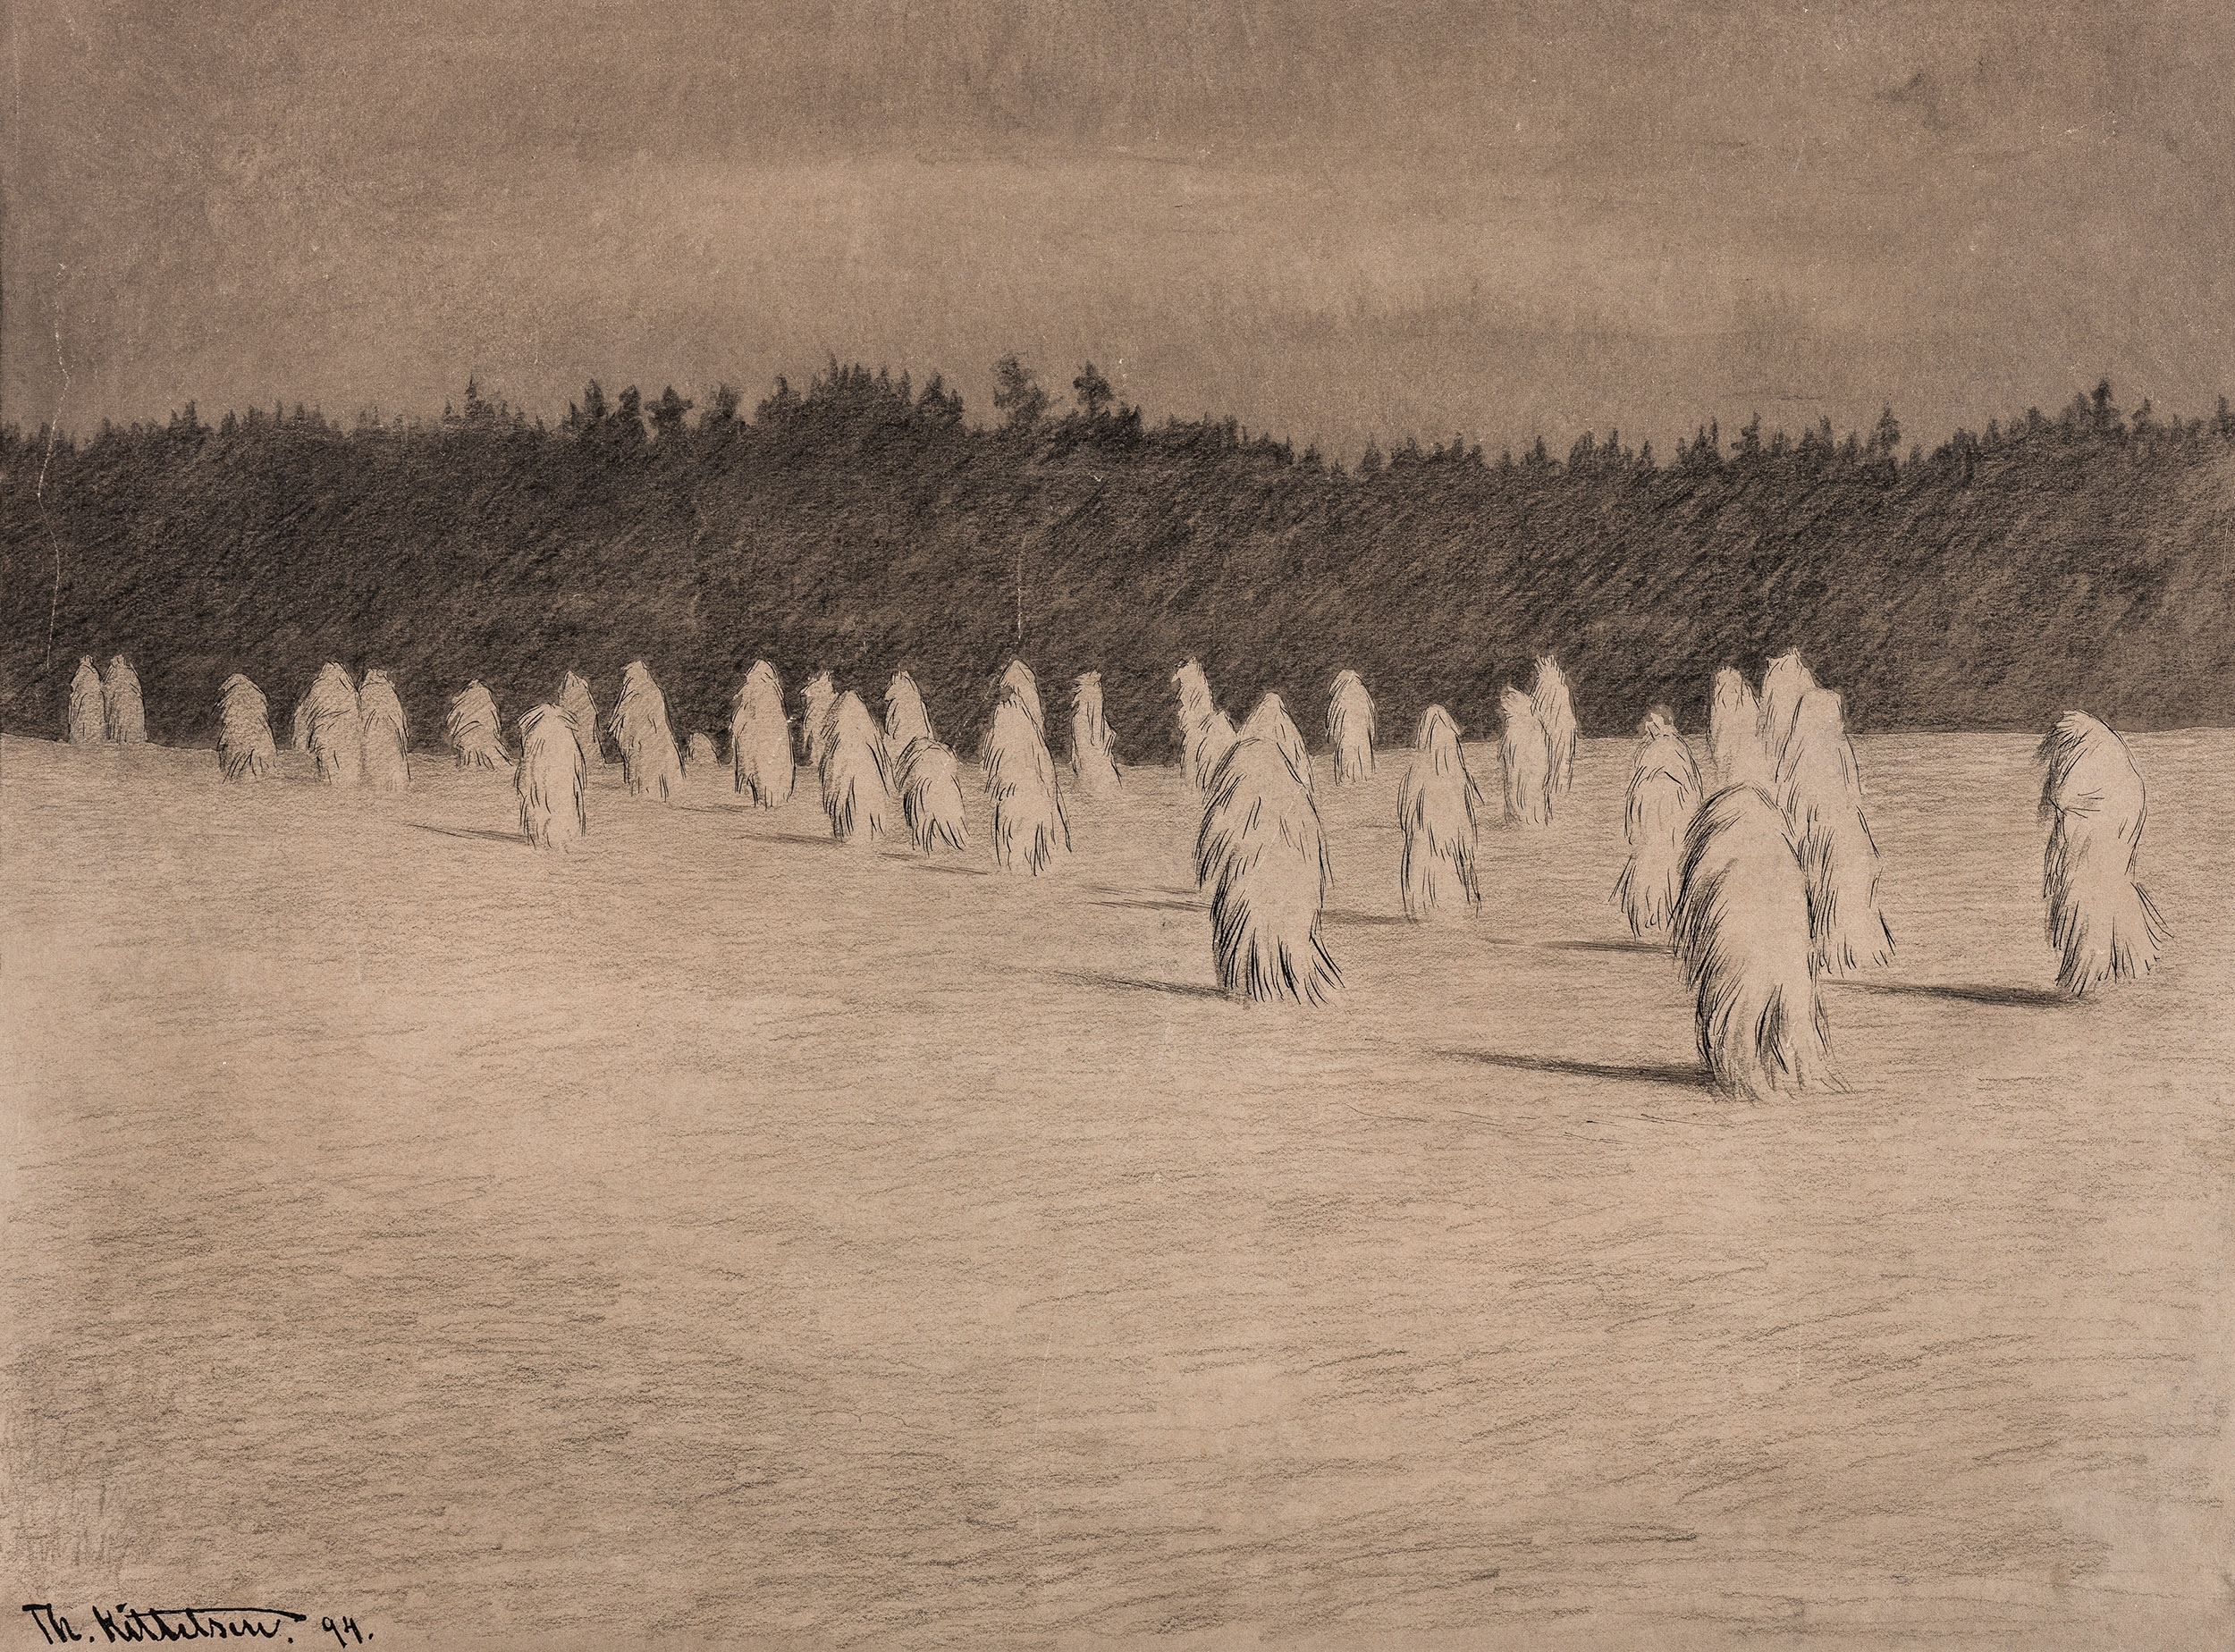 On the Road to the Suffragettes' Meeting by Theodor Kittelsen, 1894